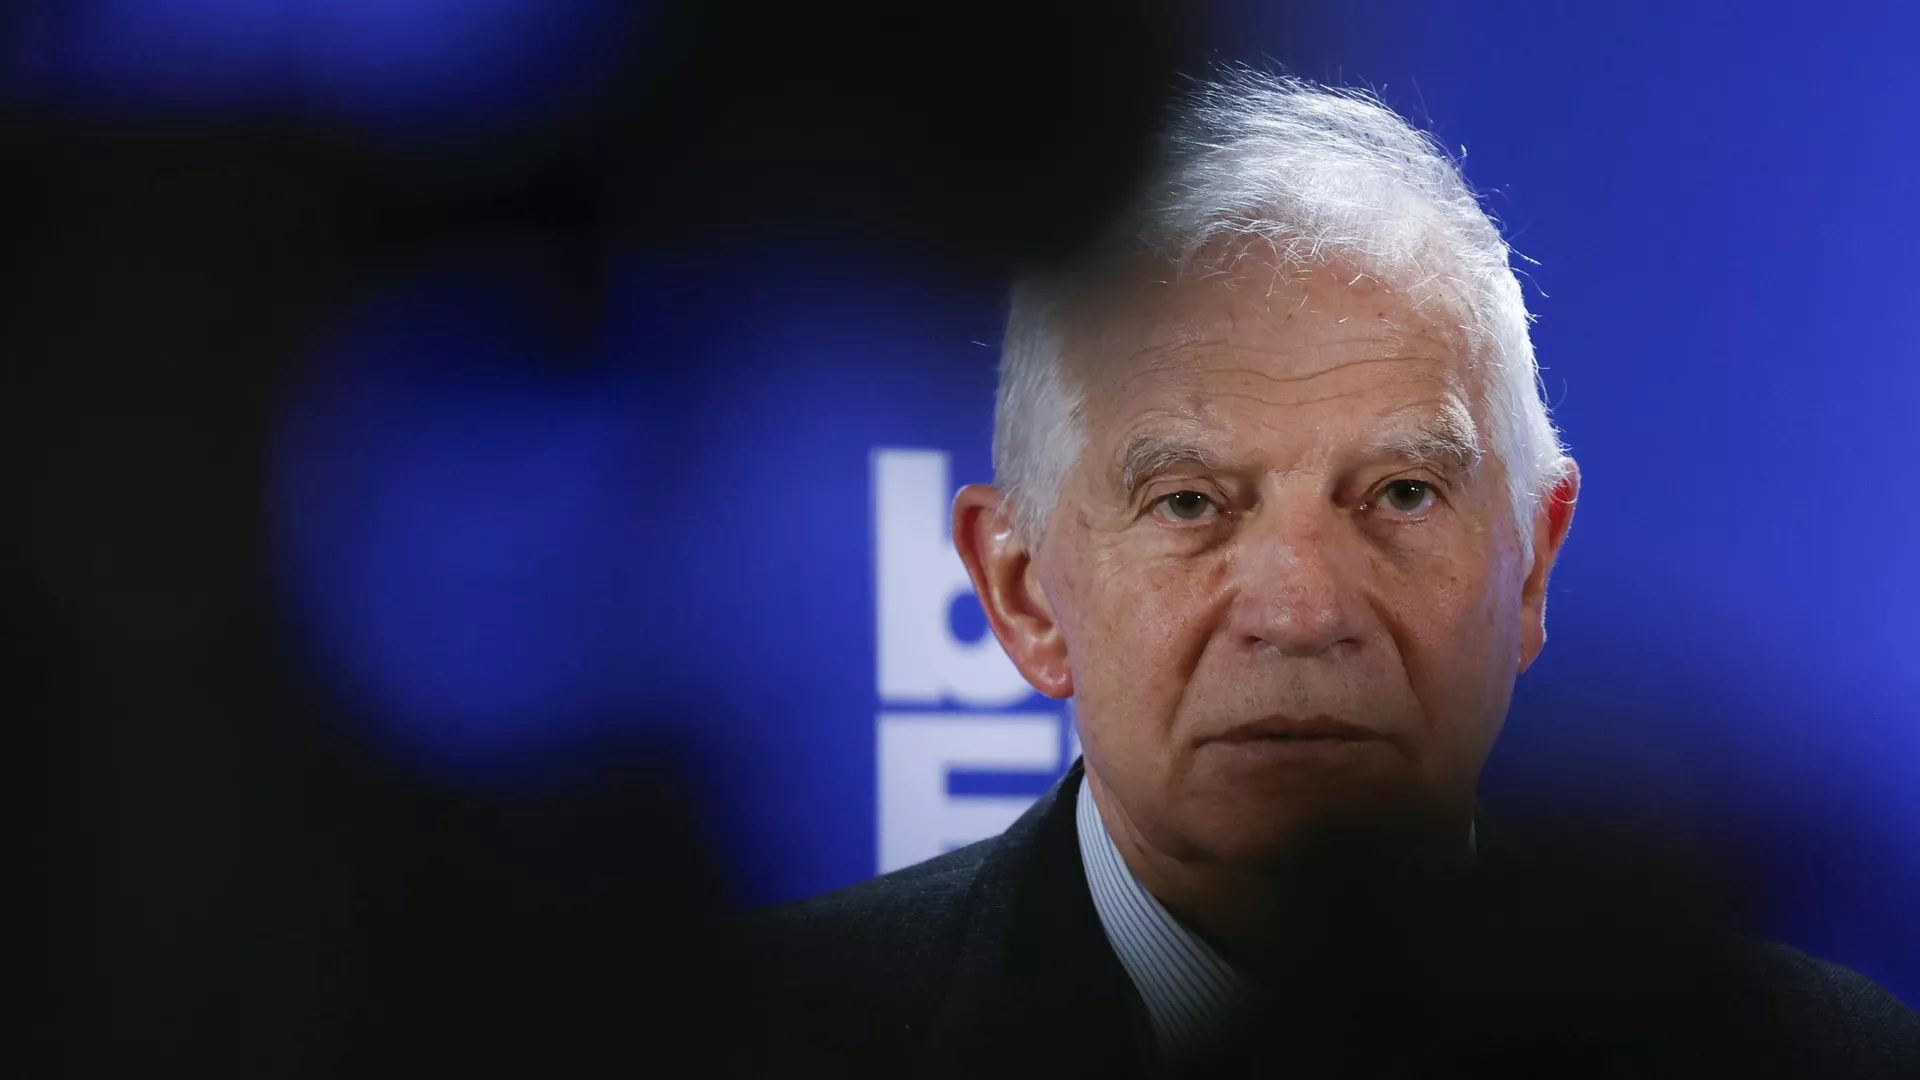 EU High Representative Borrell: We are not and will not be at war